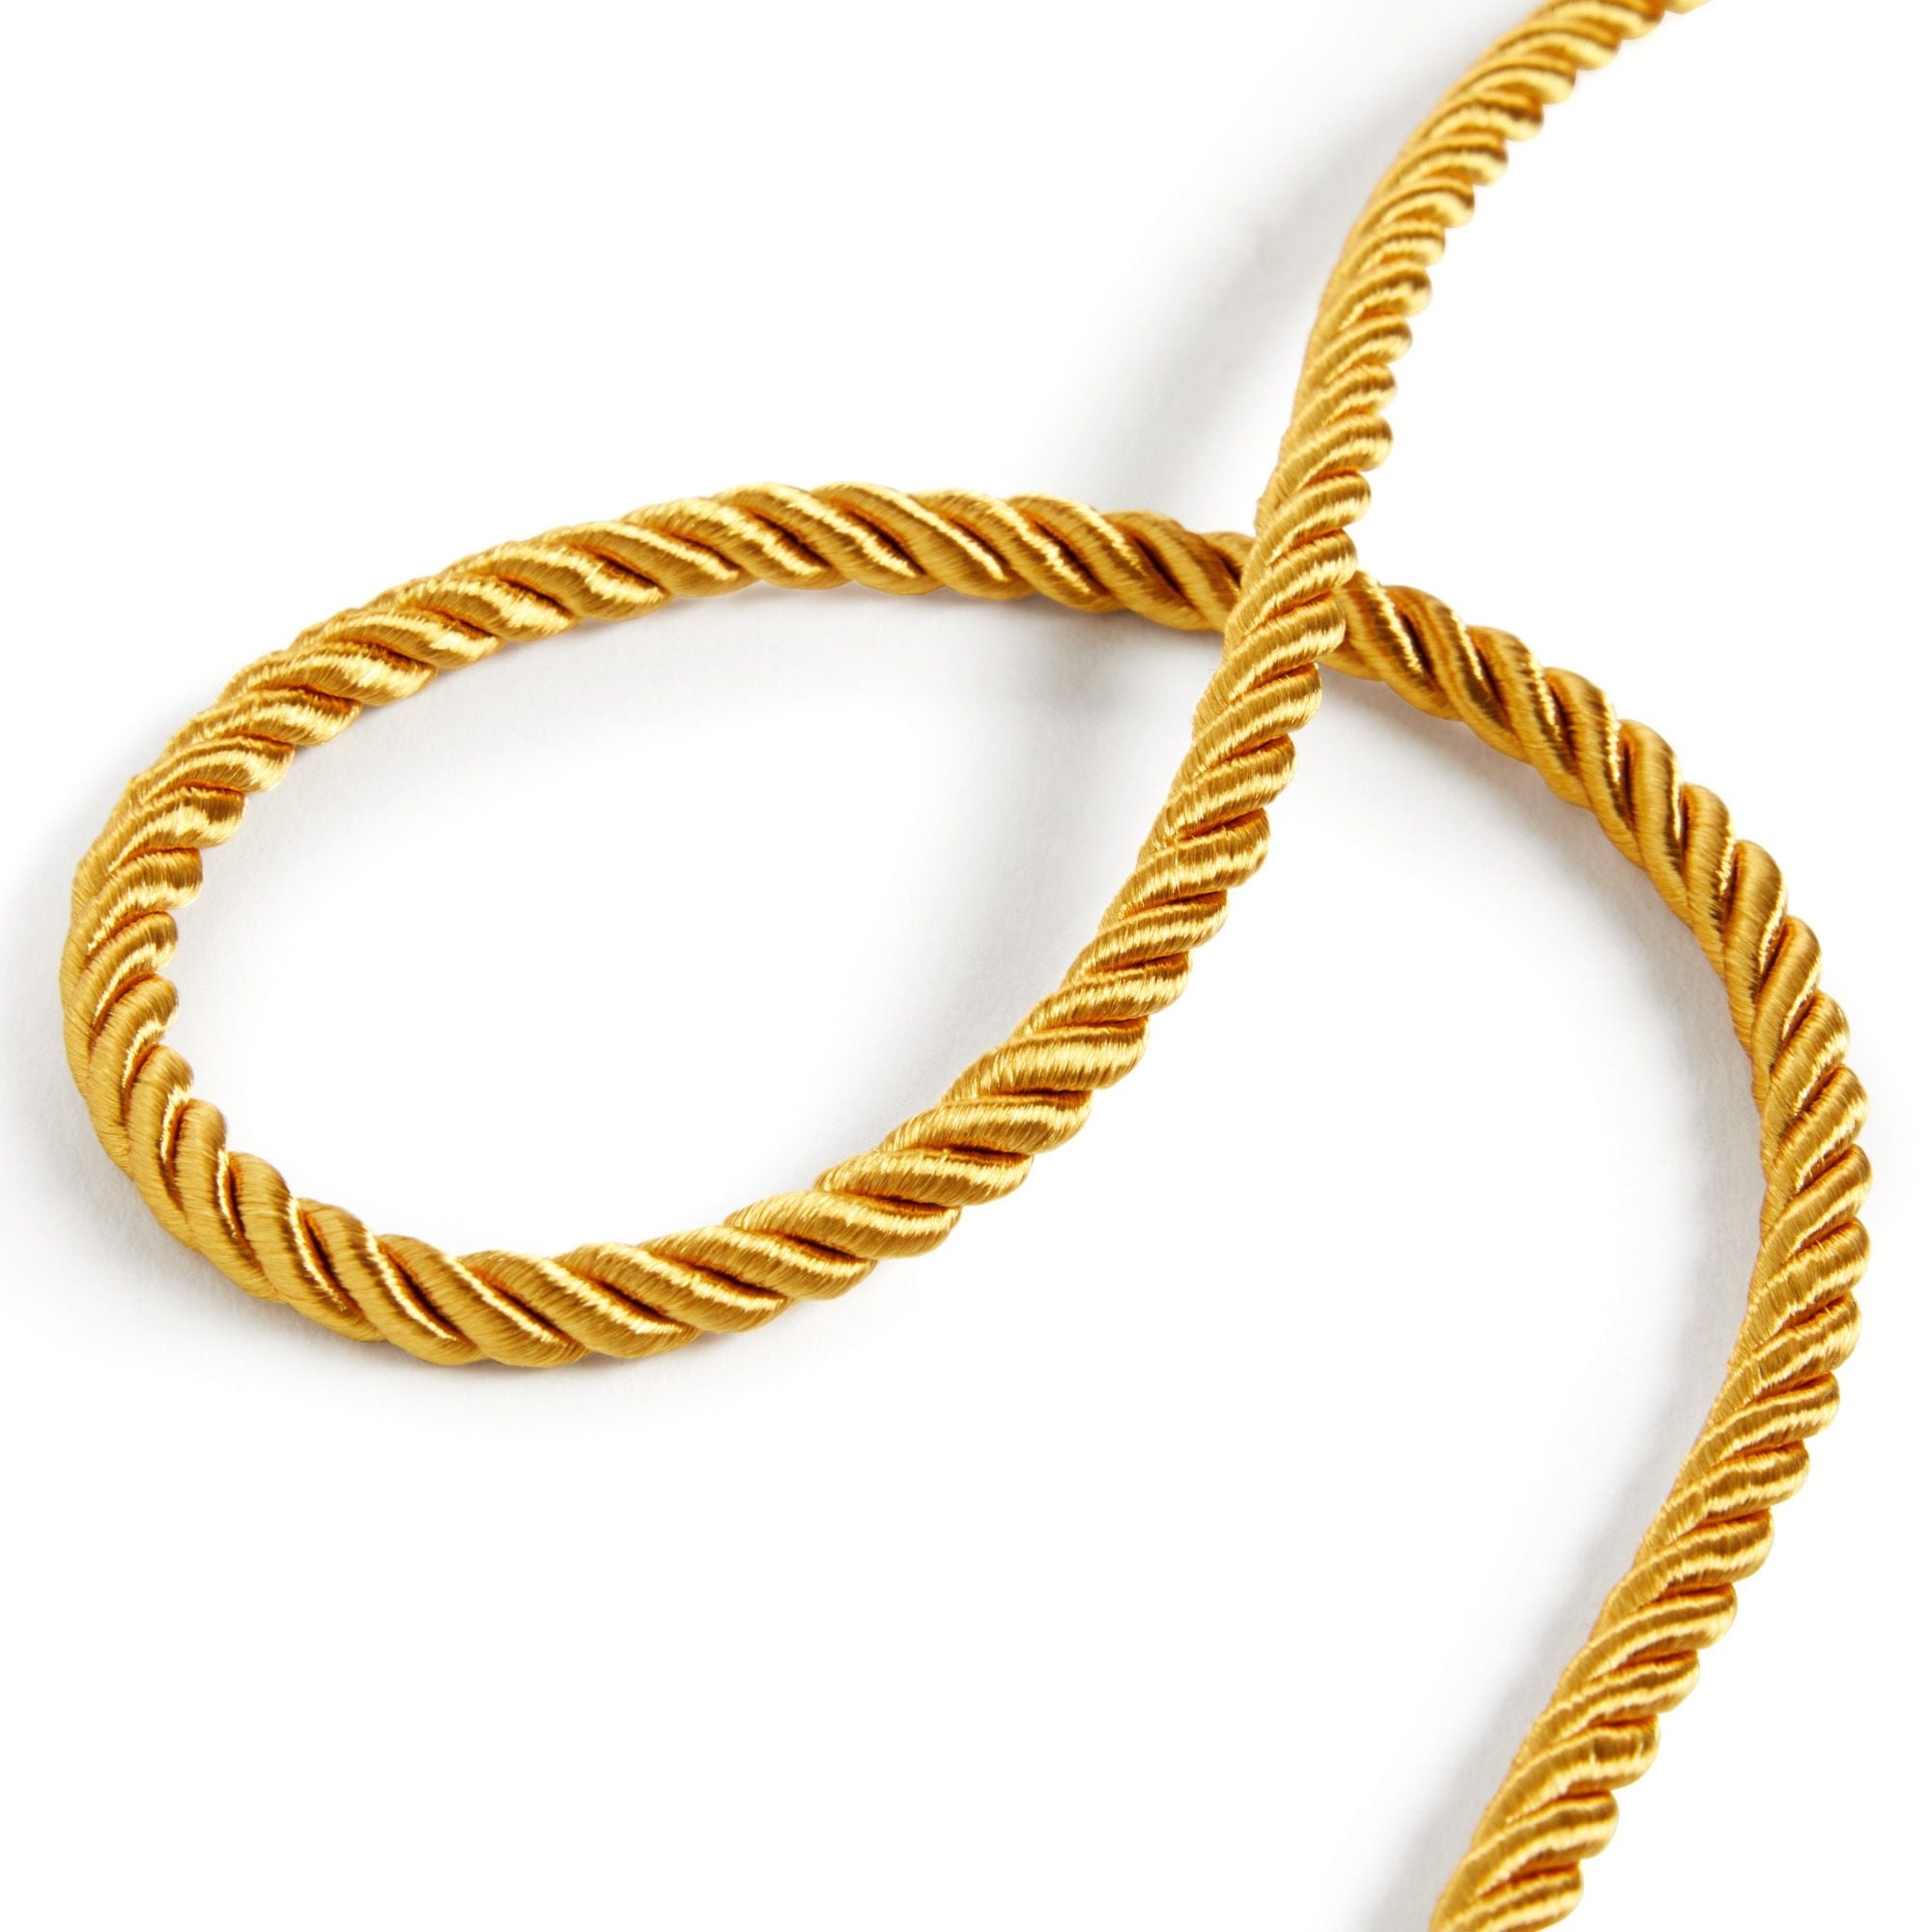 Tenn Well 5mm Twisted Cord Trim, 59 Feet Gold Decorative Rope for